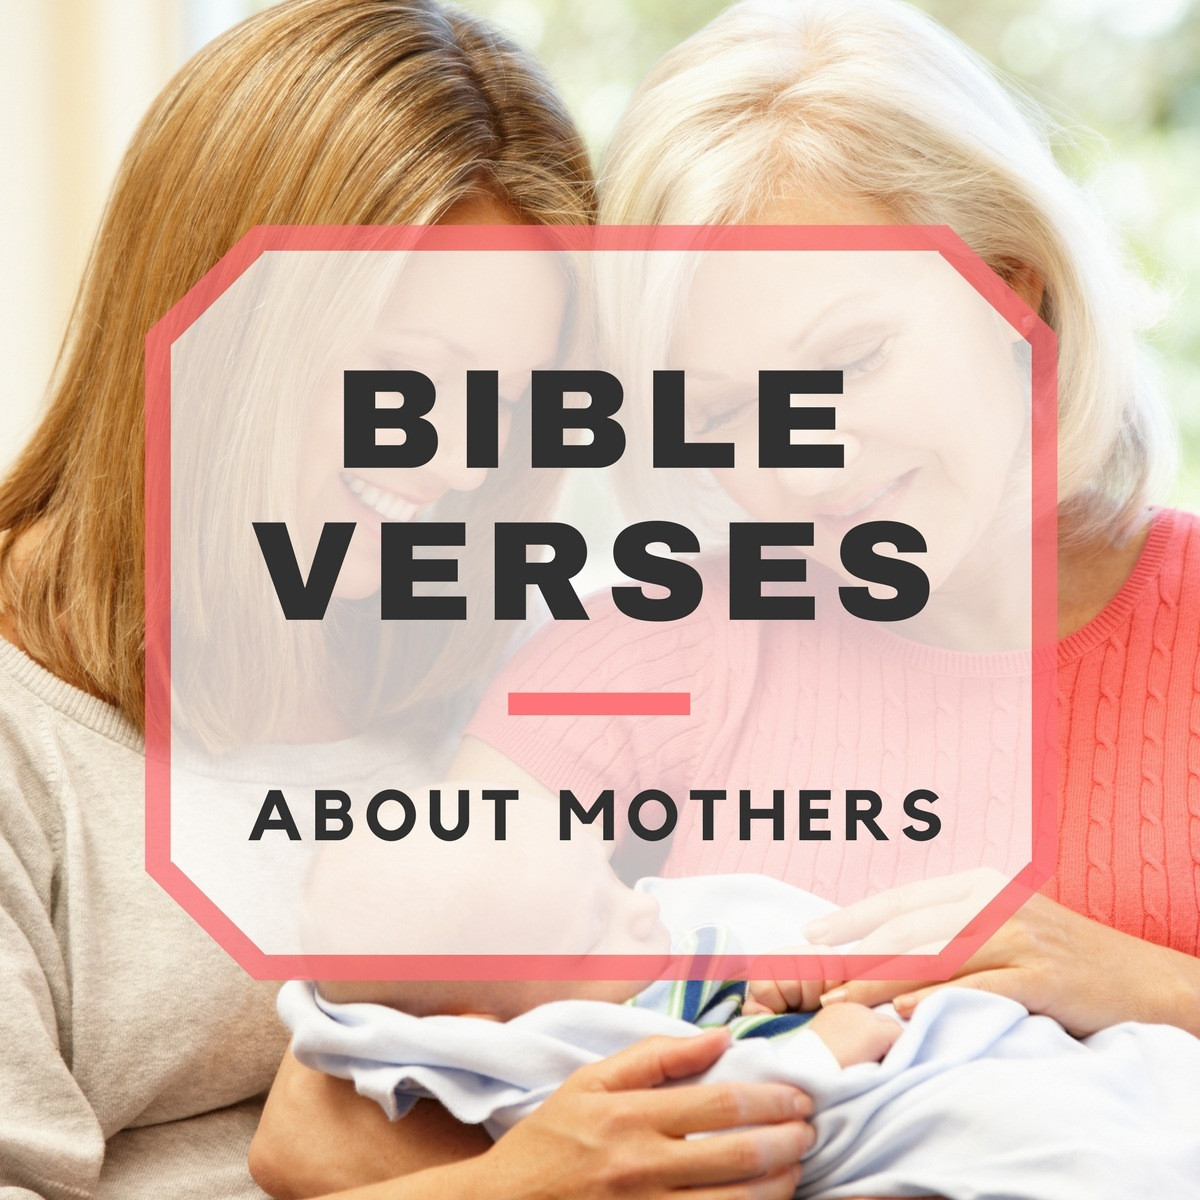 Mothers Biblical Quotes
 Bible Verses About Mothers